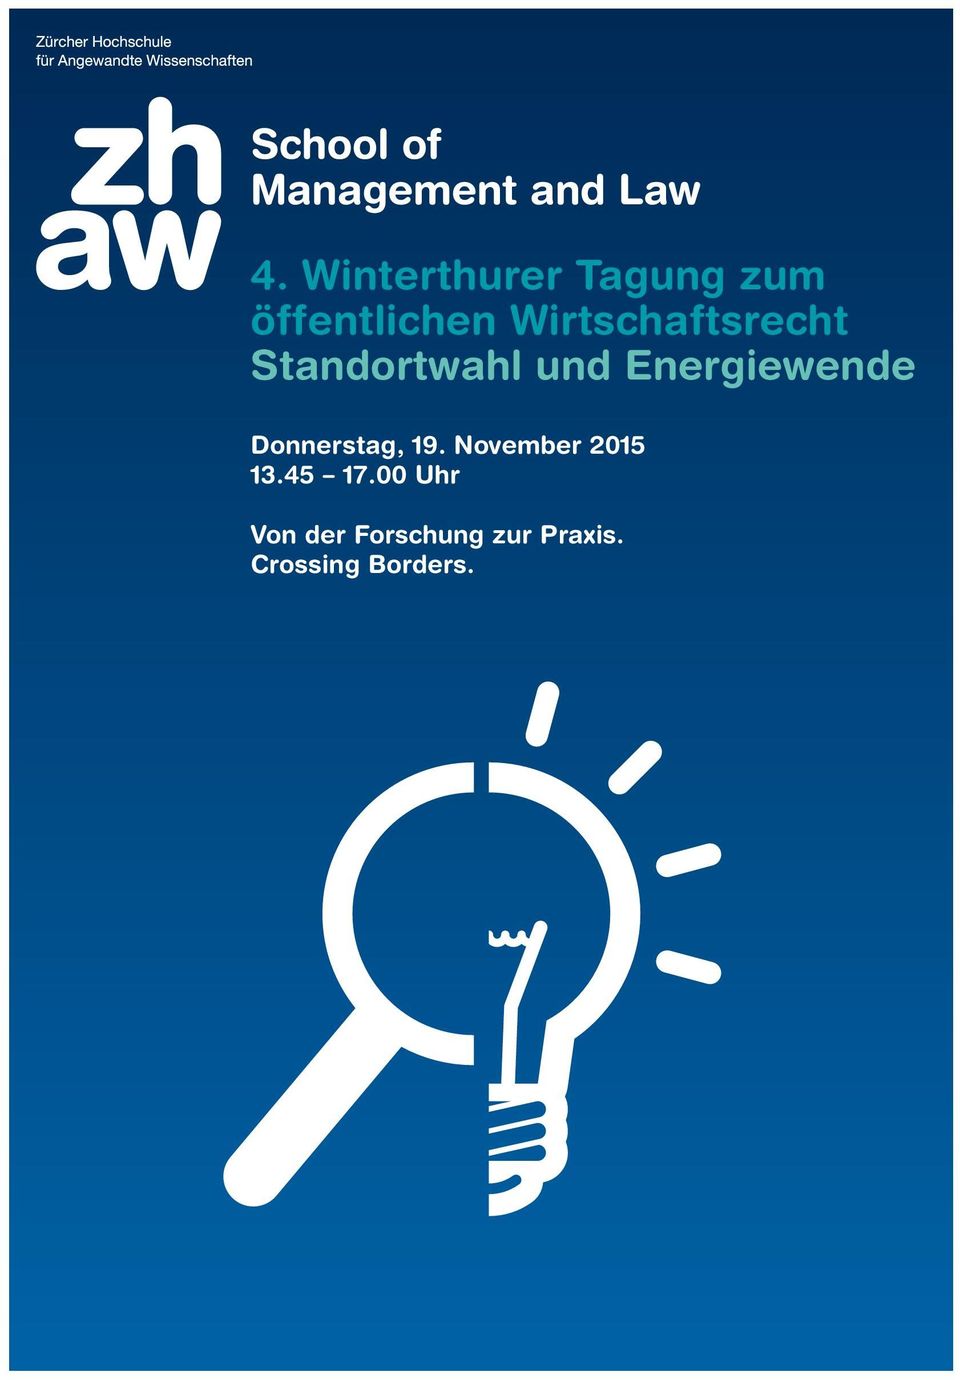 Energiewende Donnerstag, 19.